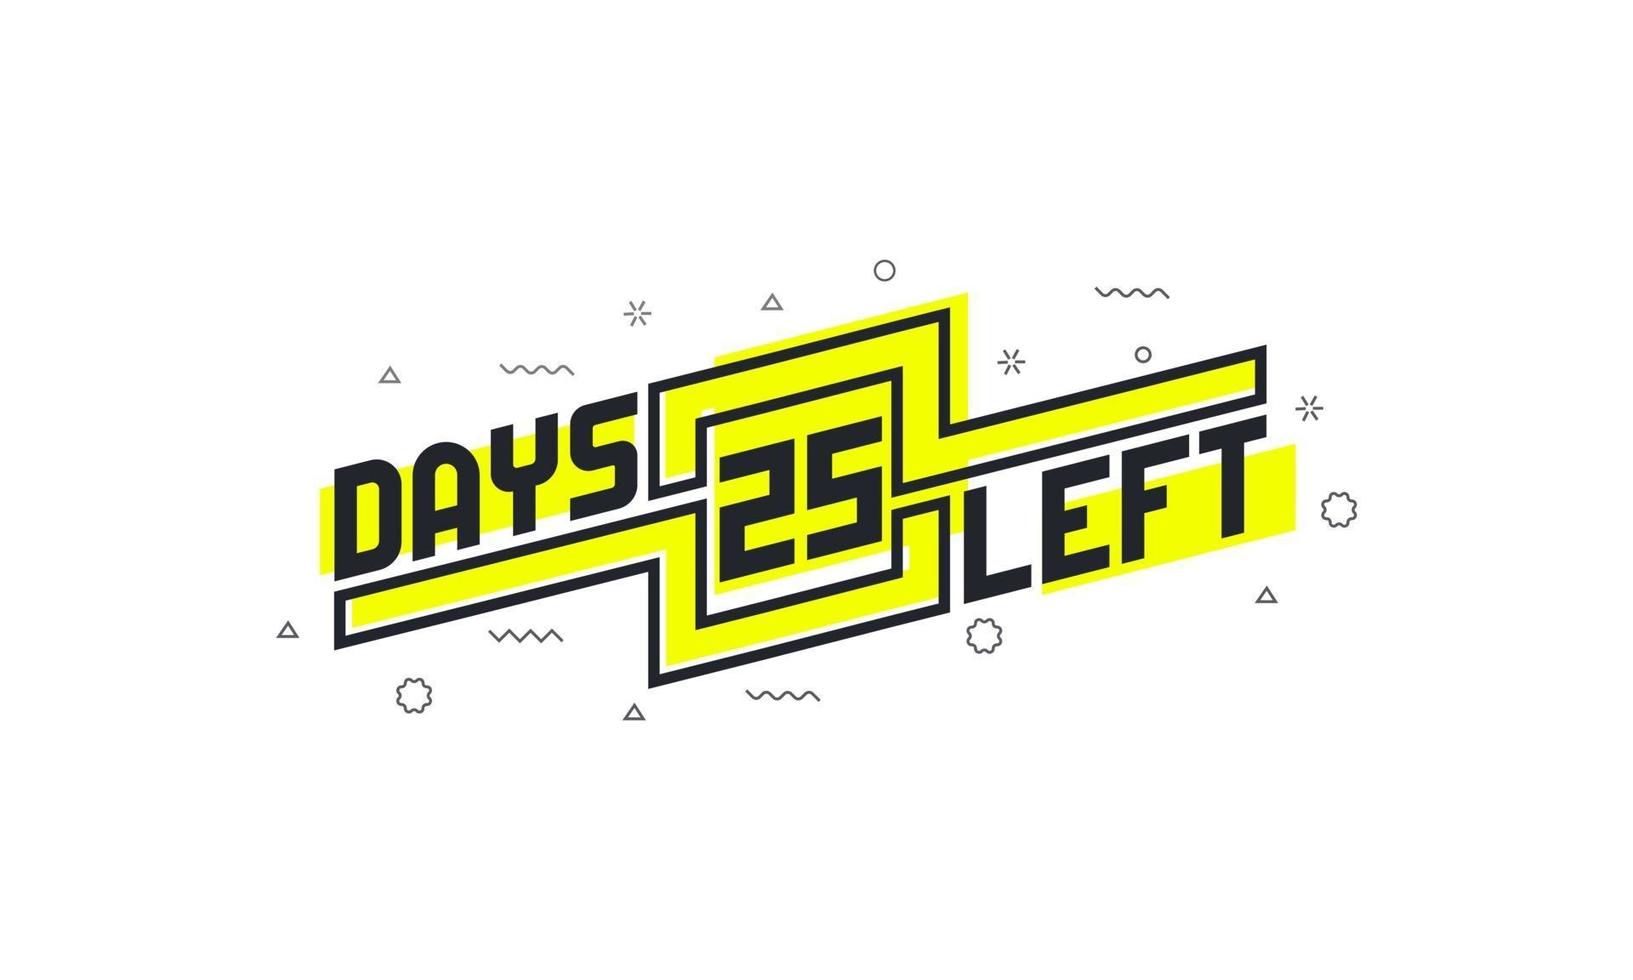 25 days left countdown sign for sale or promotion. vector